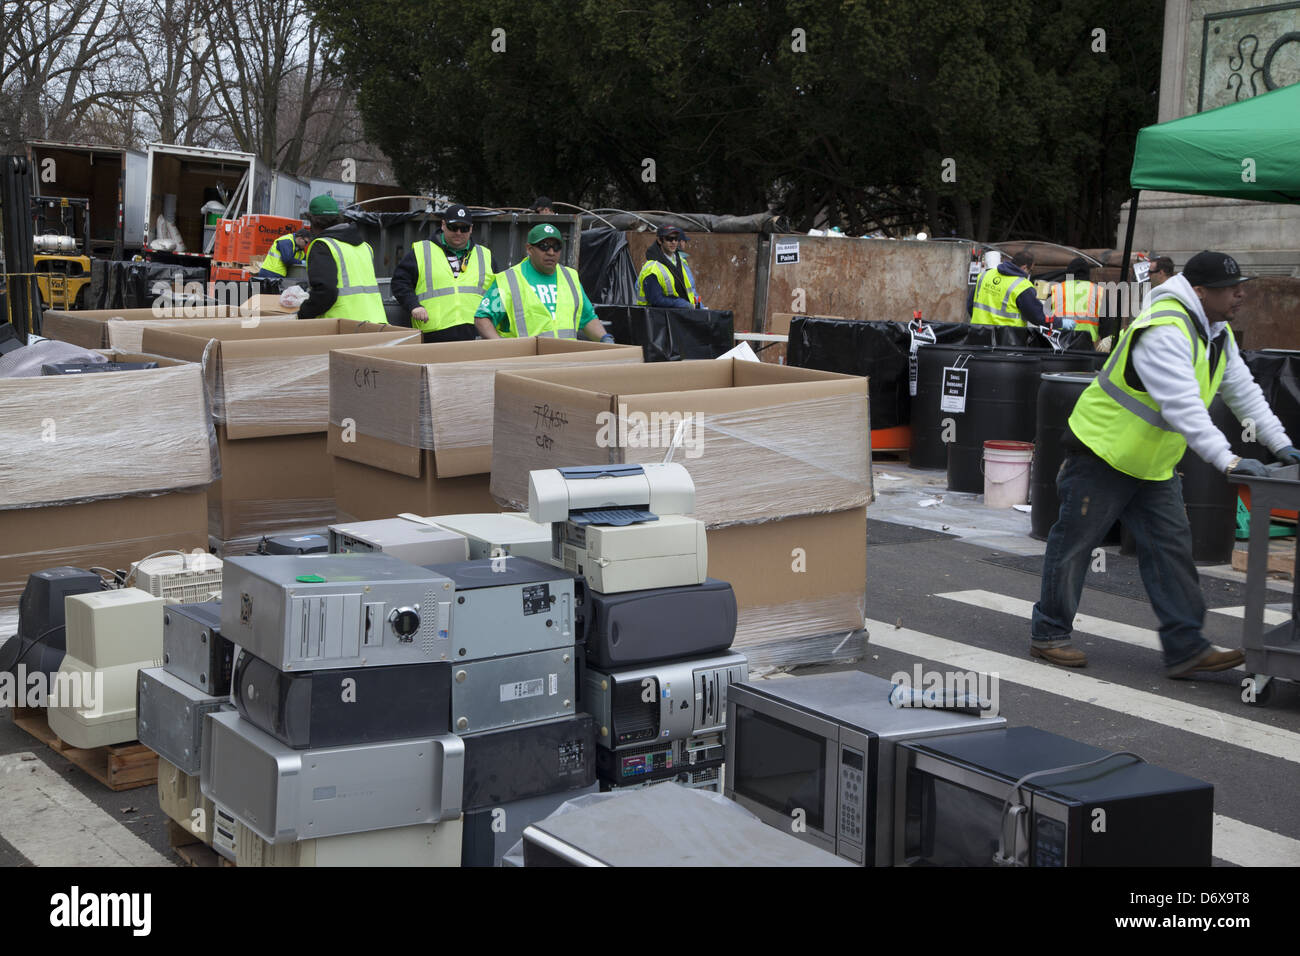 NYC Dept. of Sanitation, Bureau of Waste Prevention, electronics recycling and hazardous waste drop off day Brooklyn, NY Stock Photo